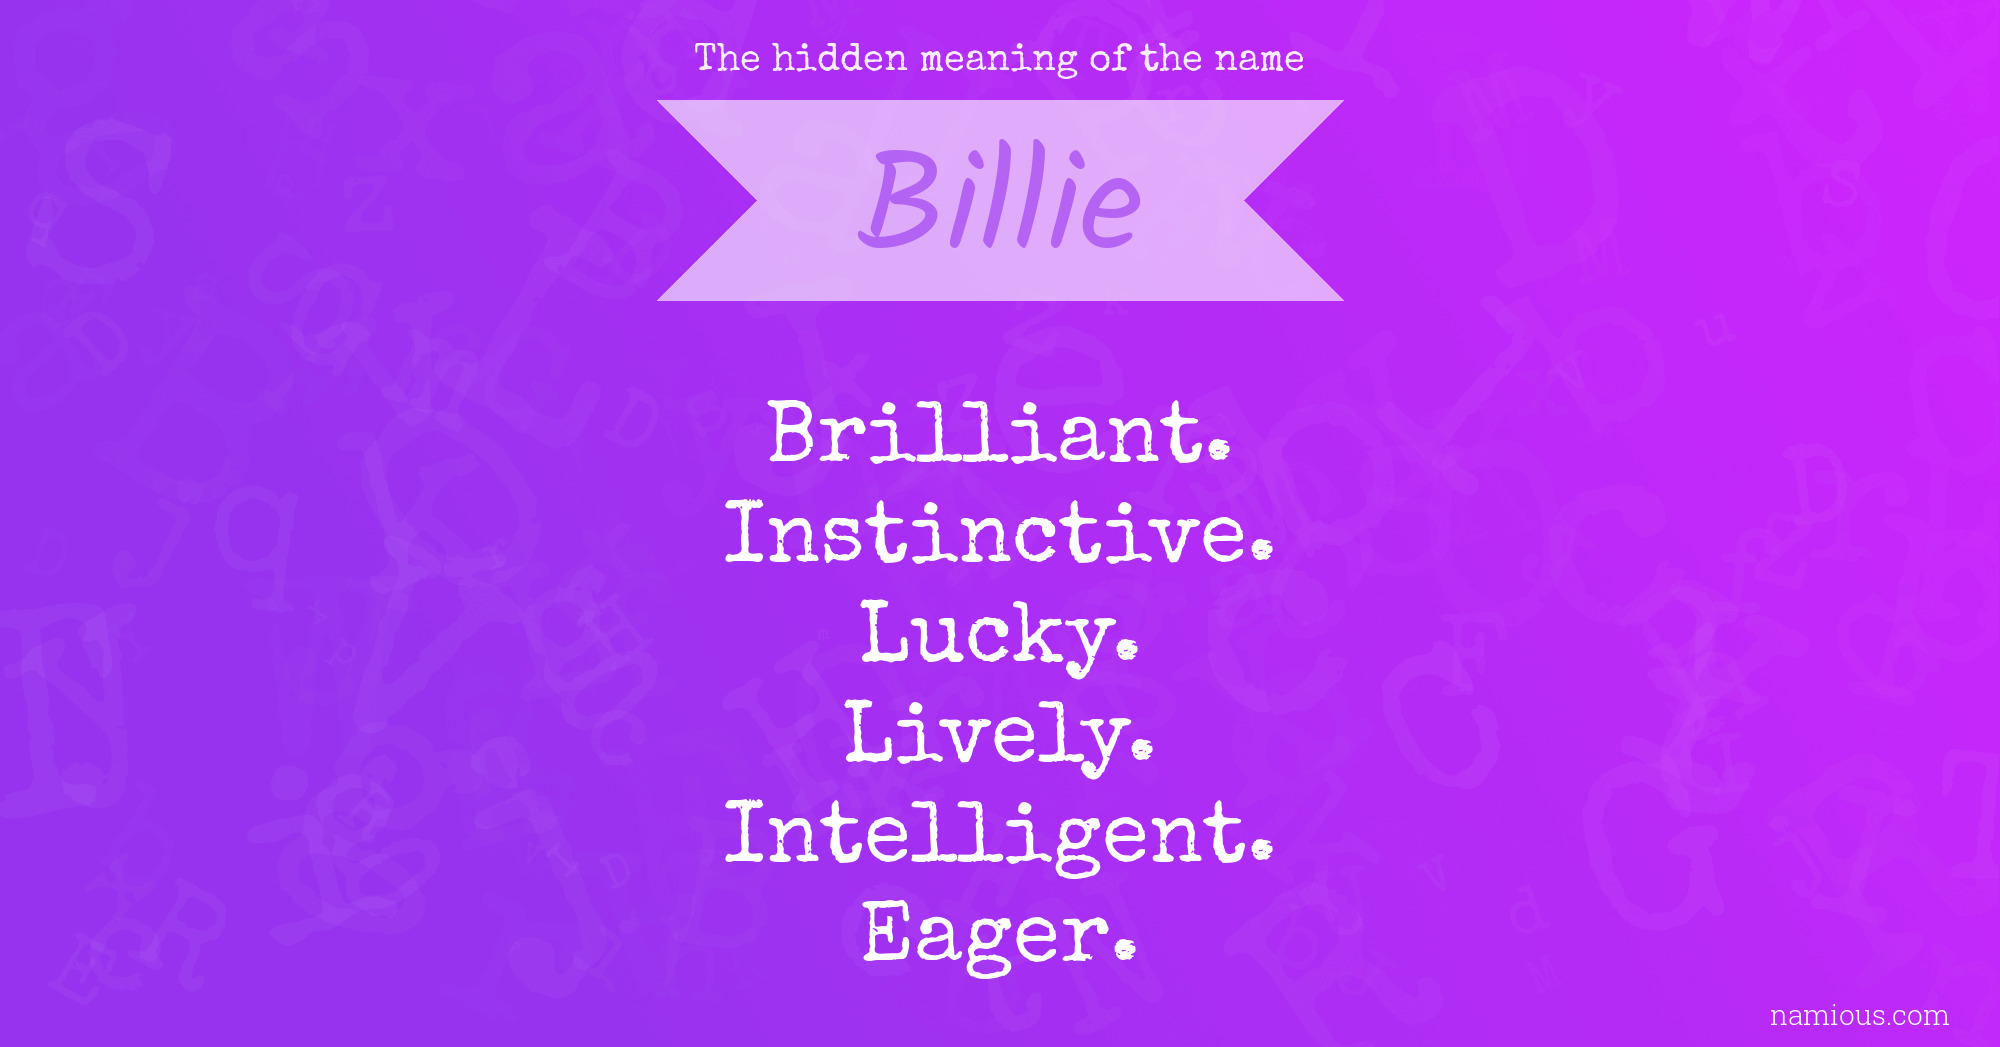 The hidden meaning of the name Billie